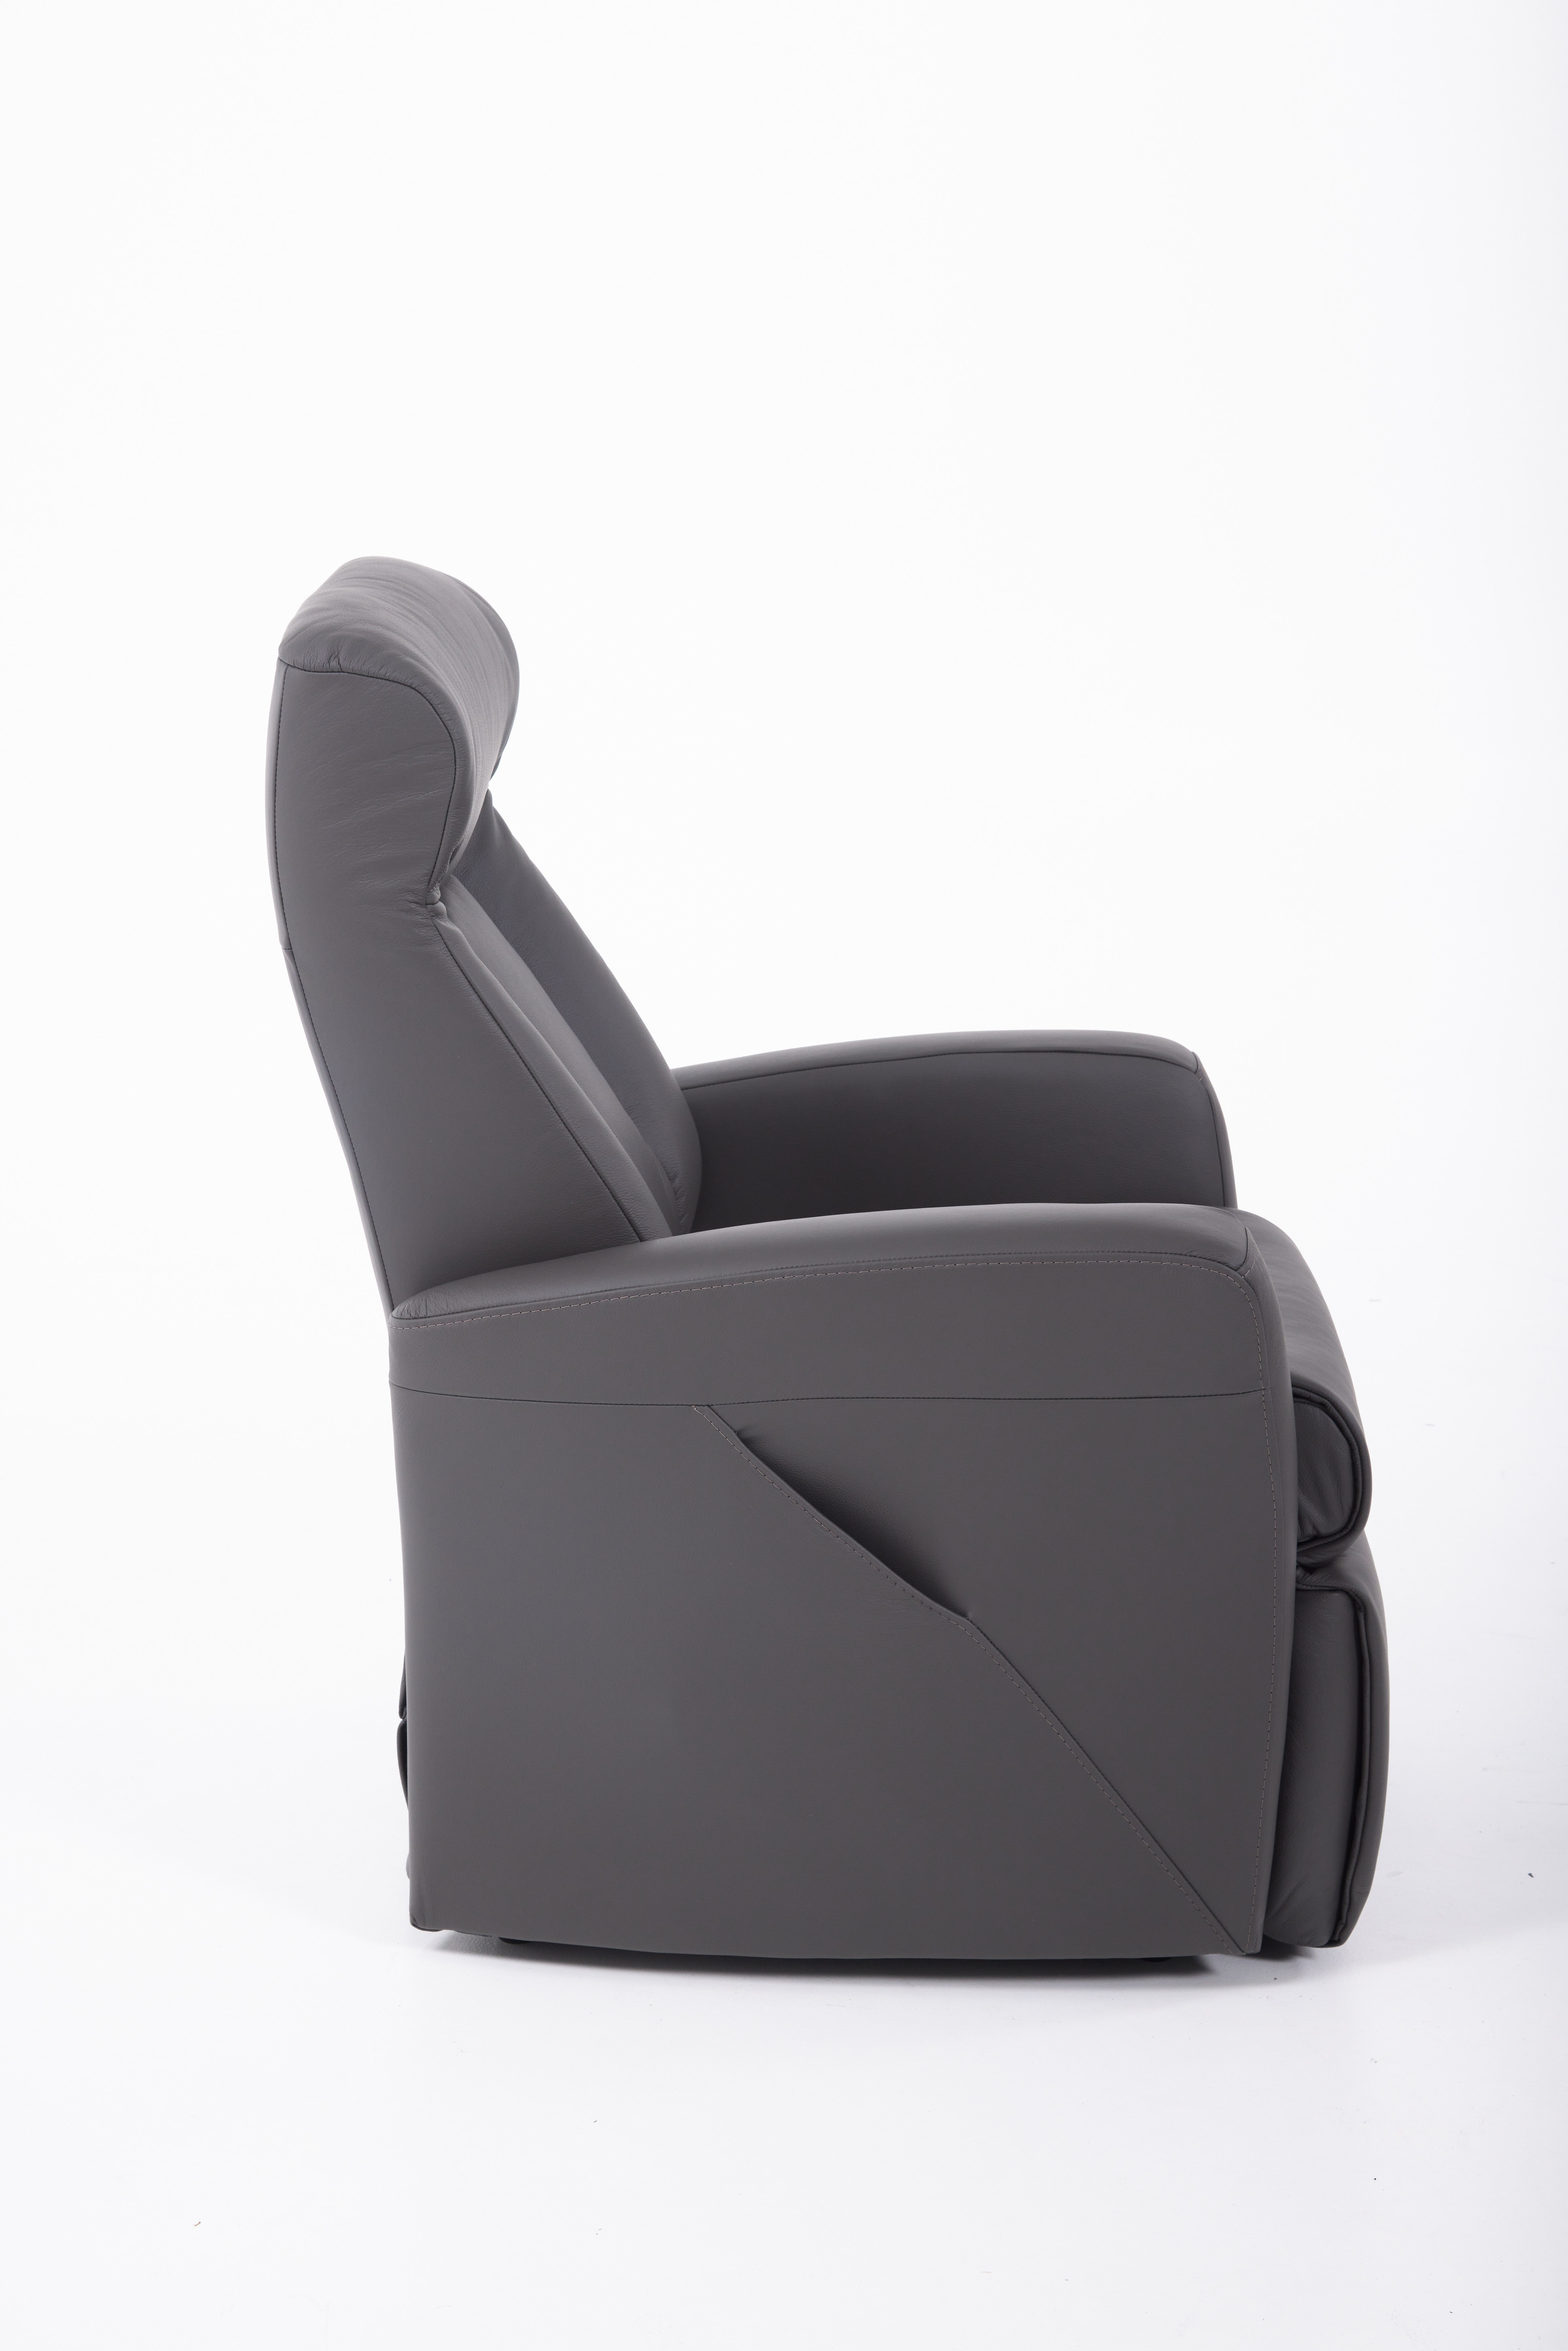 Nordic Spirit Prince Rise and Recline Chair Prime Grey